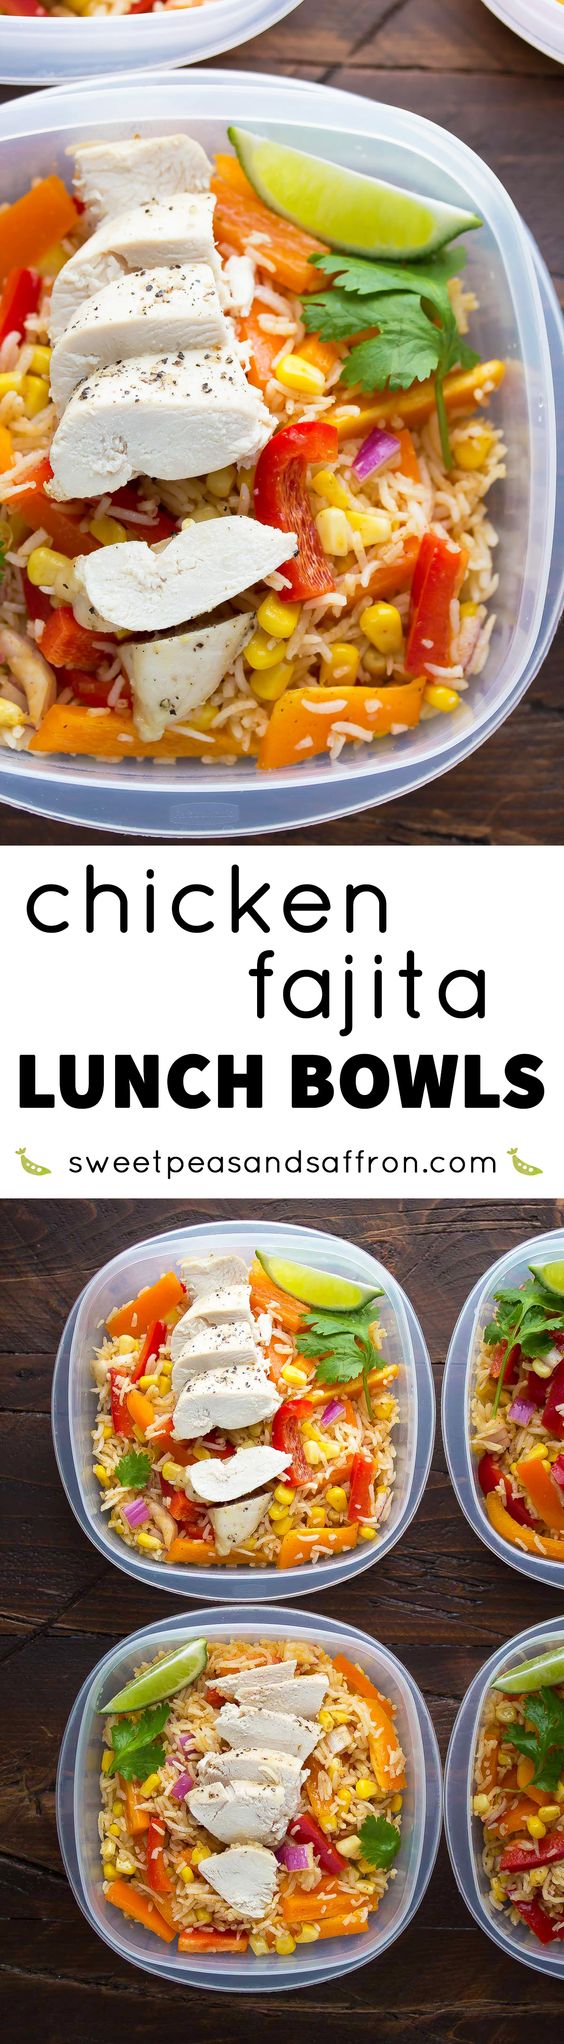 Chicken Fajita Lunch Bowls (Make Ahead). Make this recipe on Sunday and have all of your work lunches ready for the week!